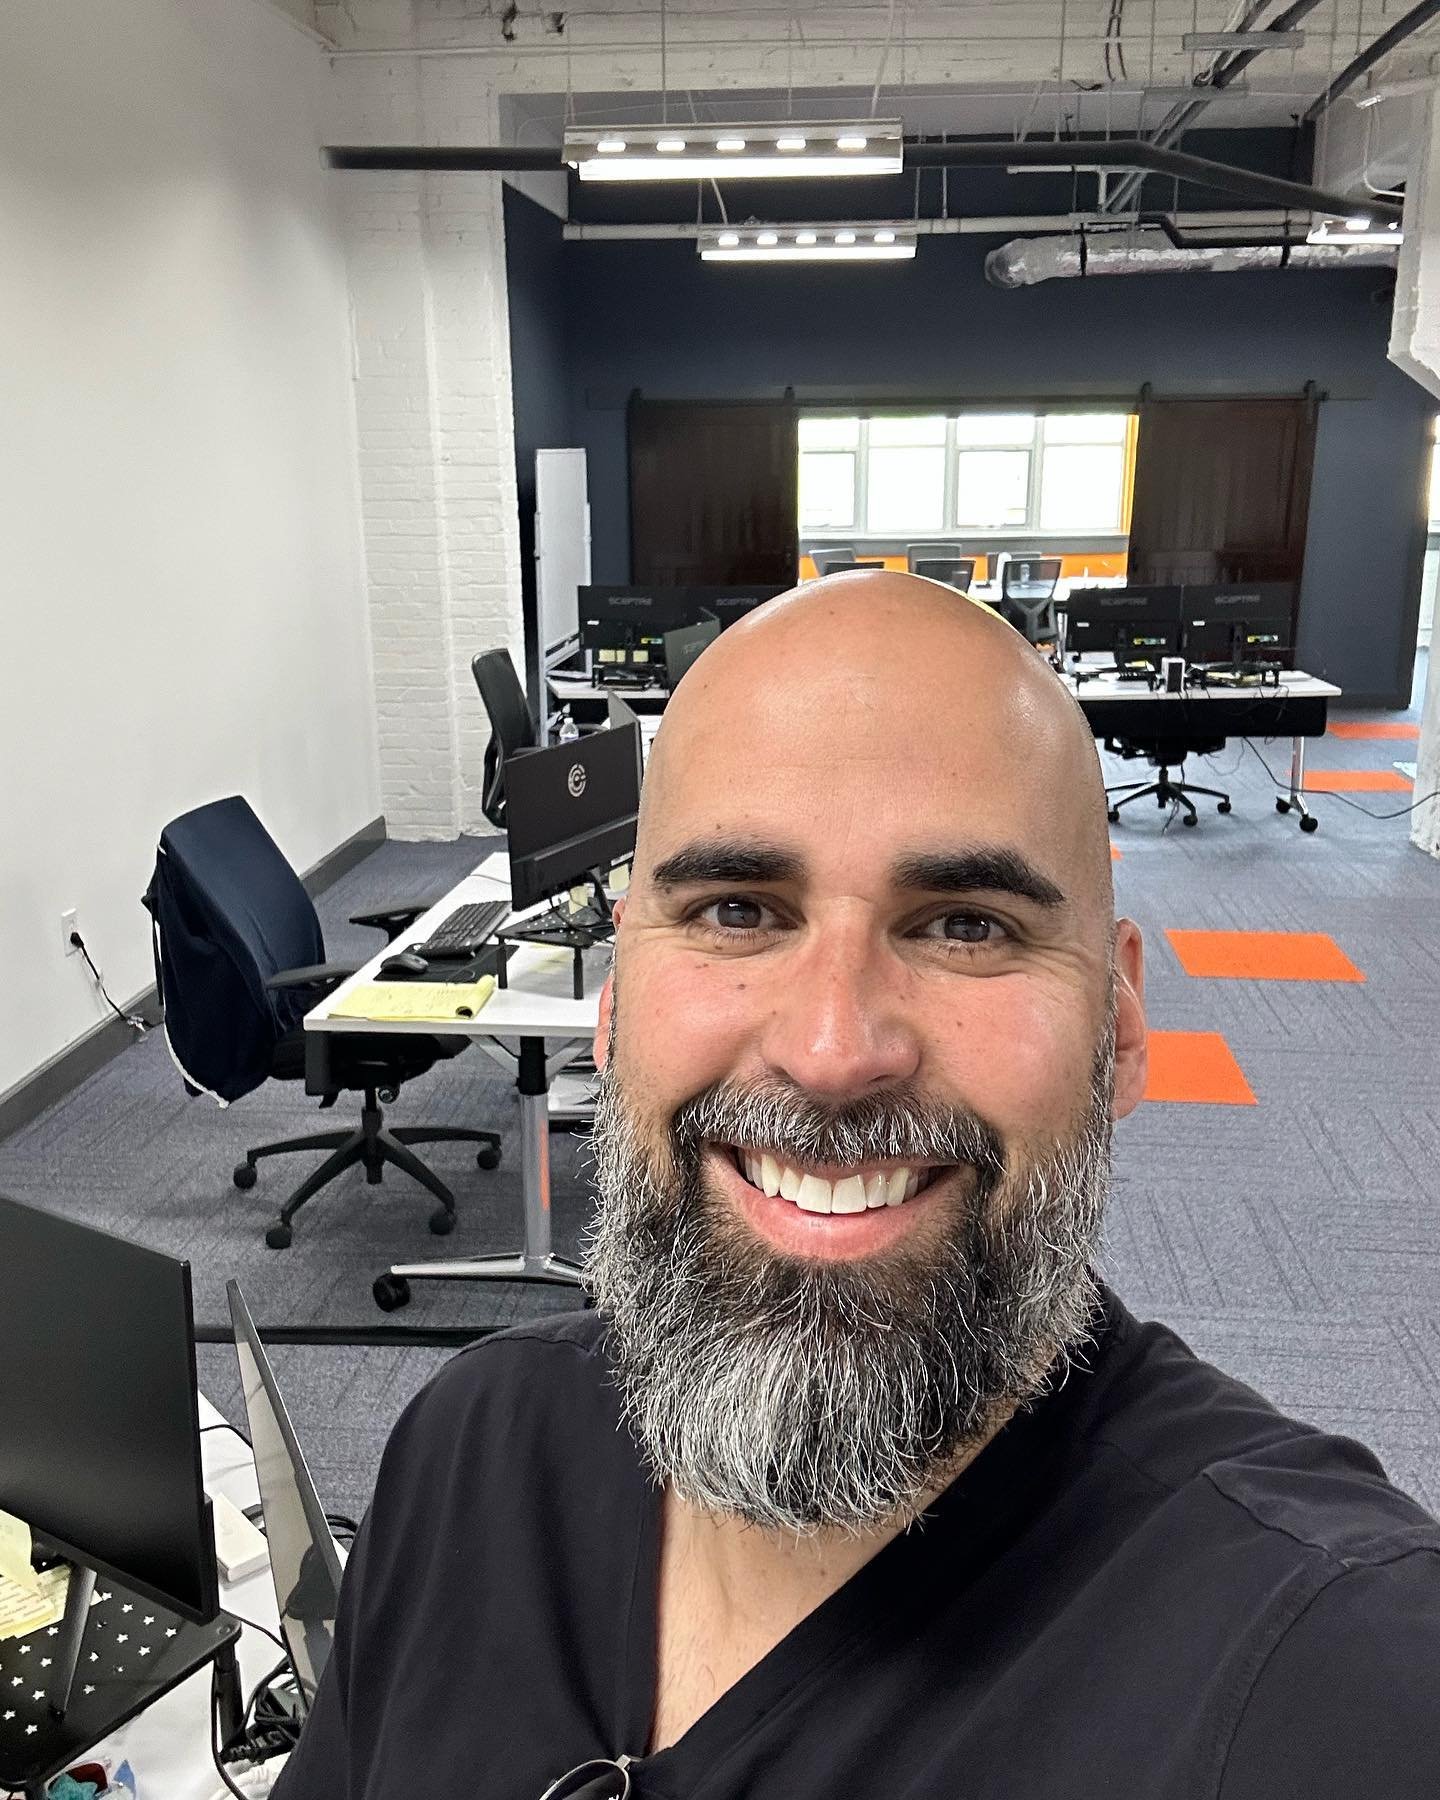 Just stopped in to &ldquo;clean&rdquo; our Operations center this weekend.  I still think it&rsquo;s amazing that great people have signed up to join the mission.  Now off you the gym&hellip;